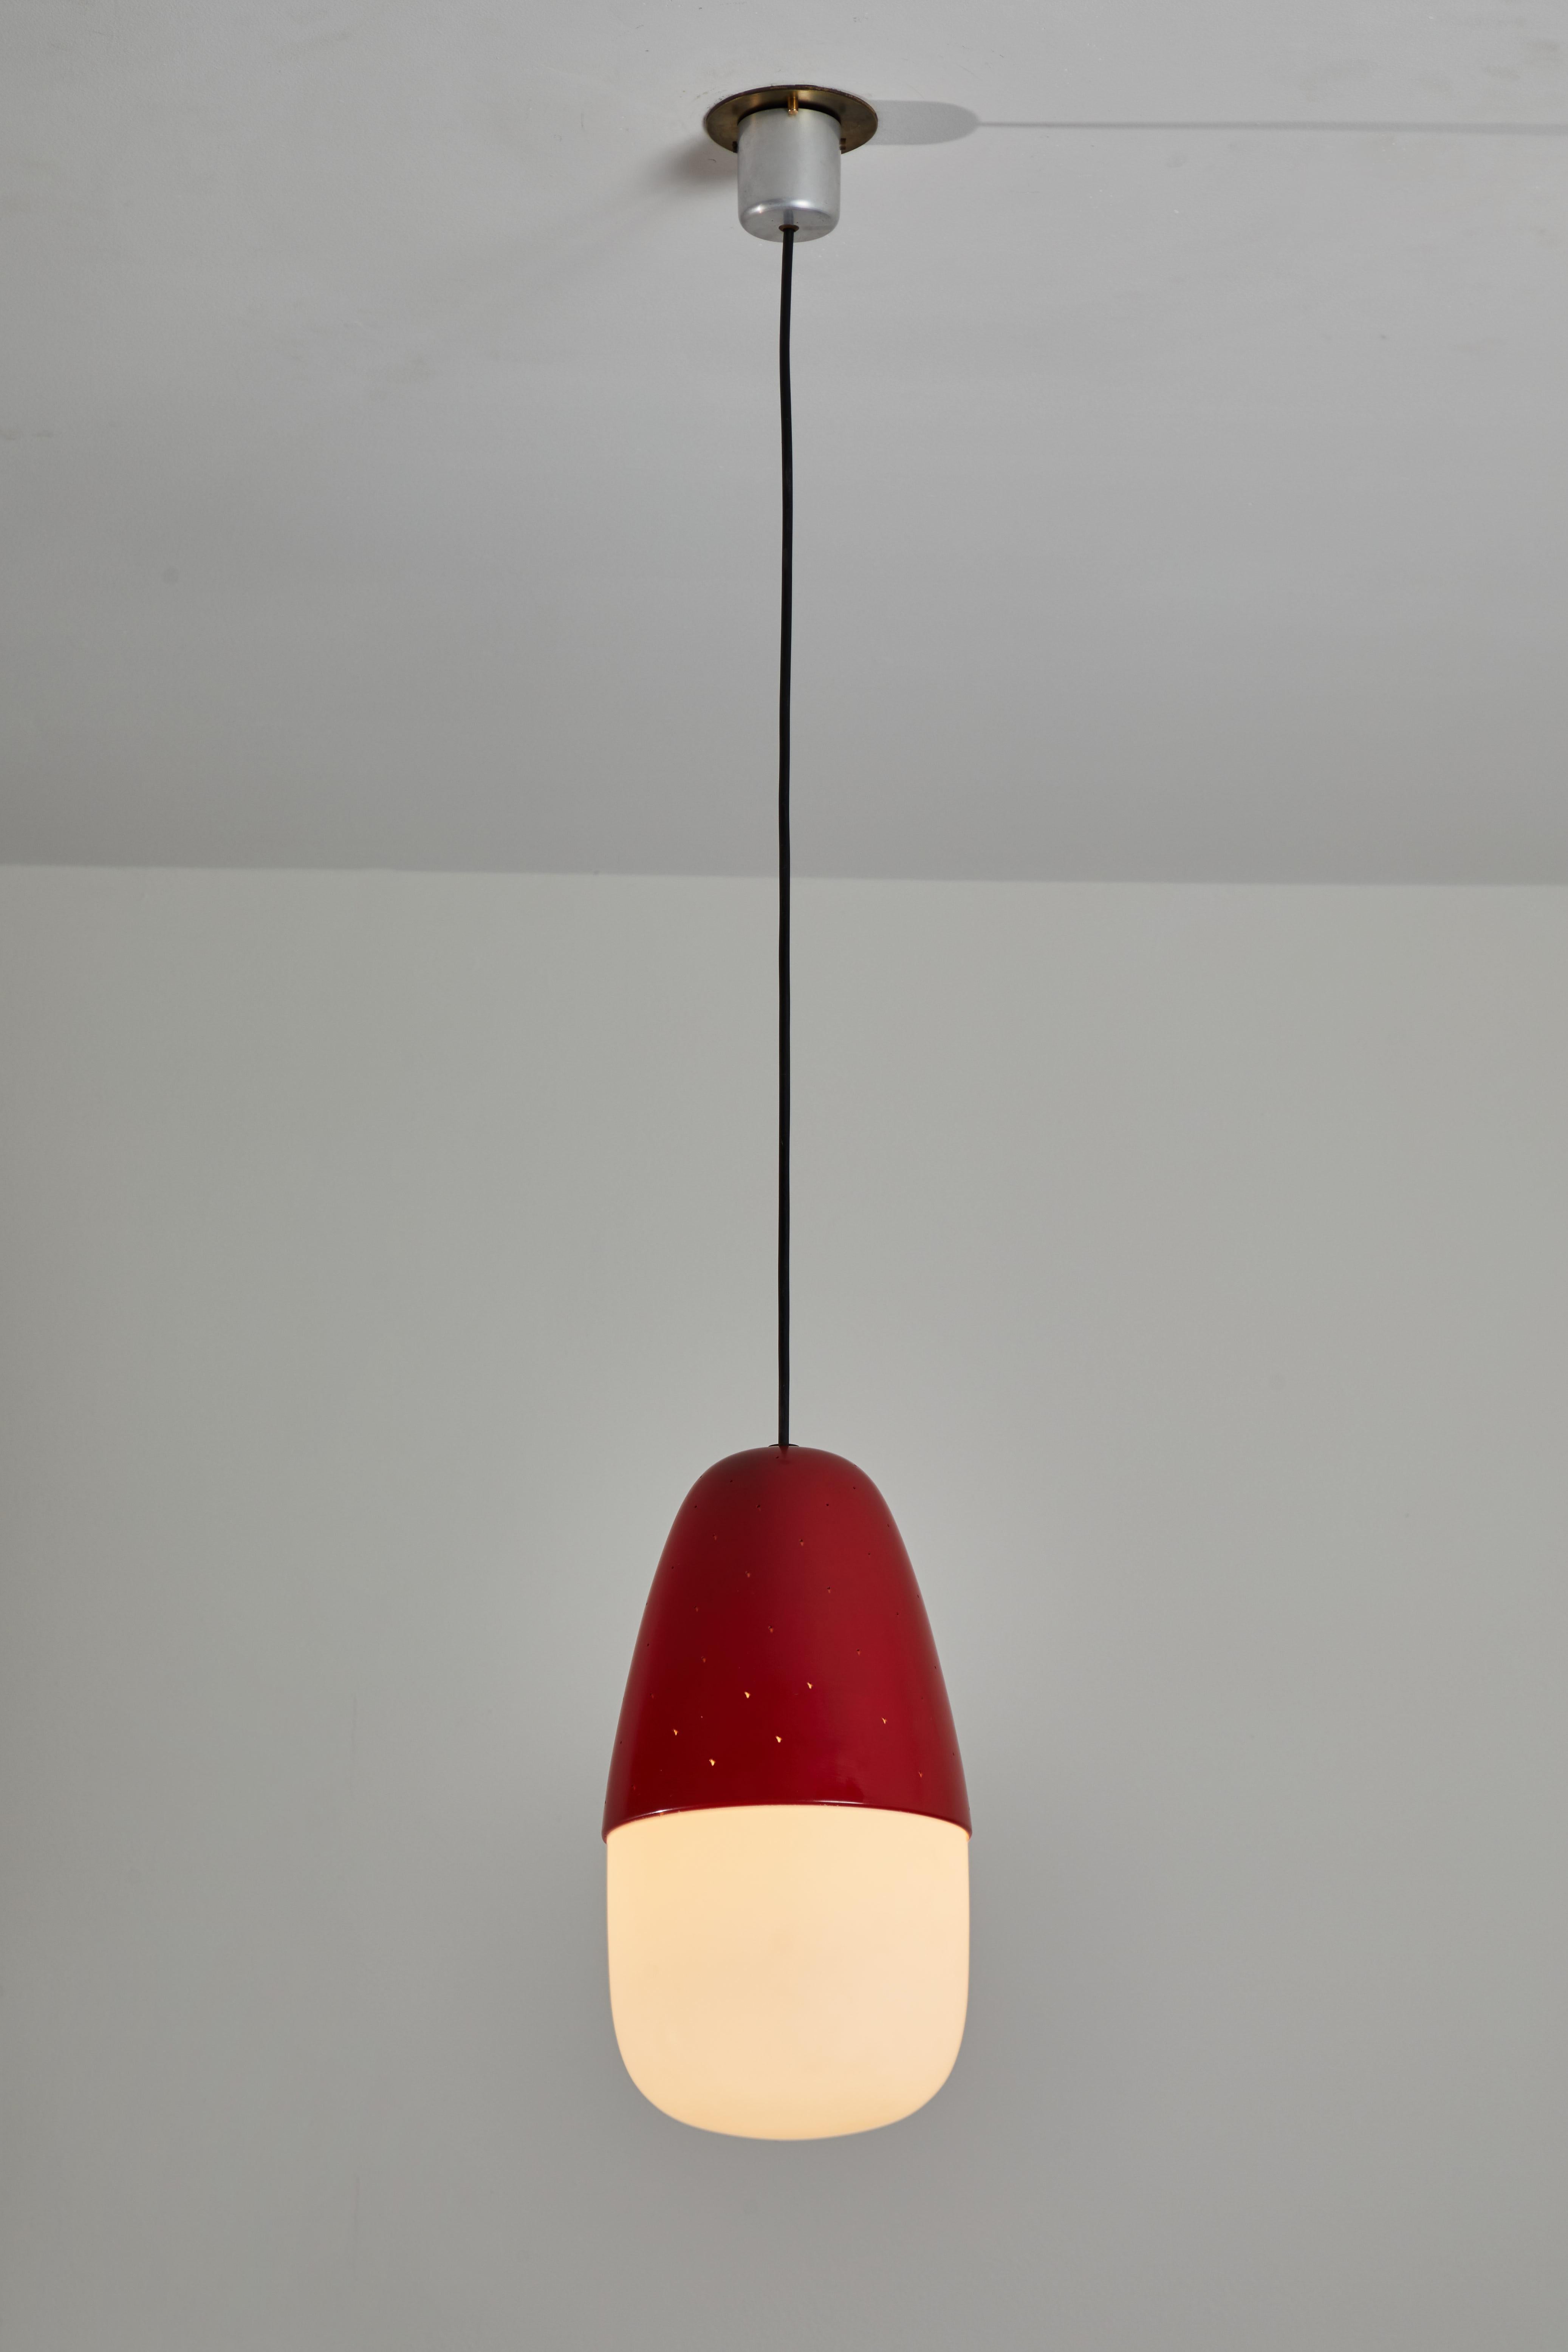 Model 2079 pendant by Gino Sarfatti for Arteluce. Designed and manufactured in Italy, 1955. Opaline glass diffuser, reflector with reversed micro perforated aluminum cup. Lacquered in red. Original canopy with custom brass ceiling plate. Maintains